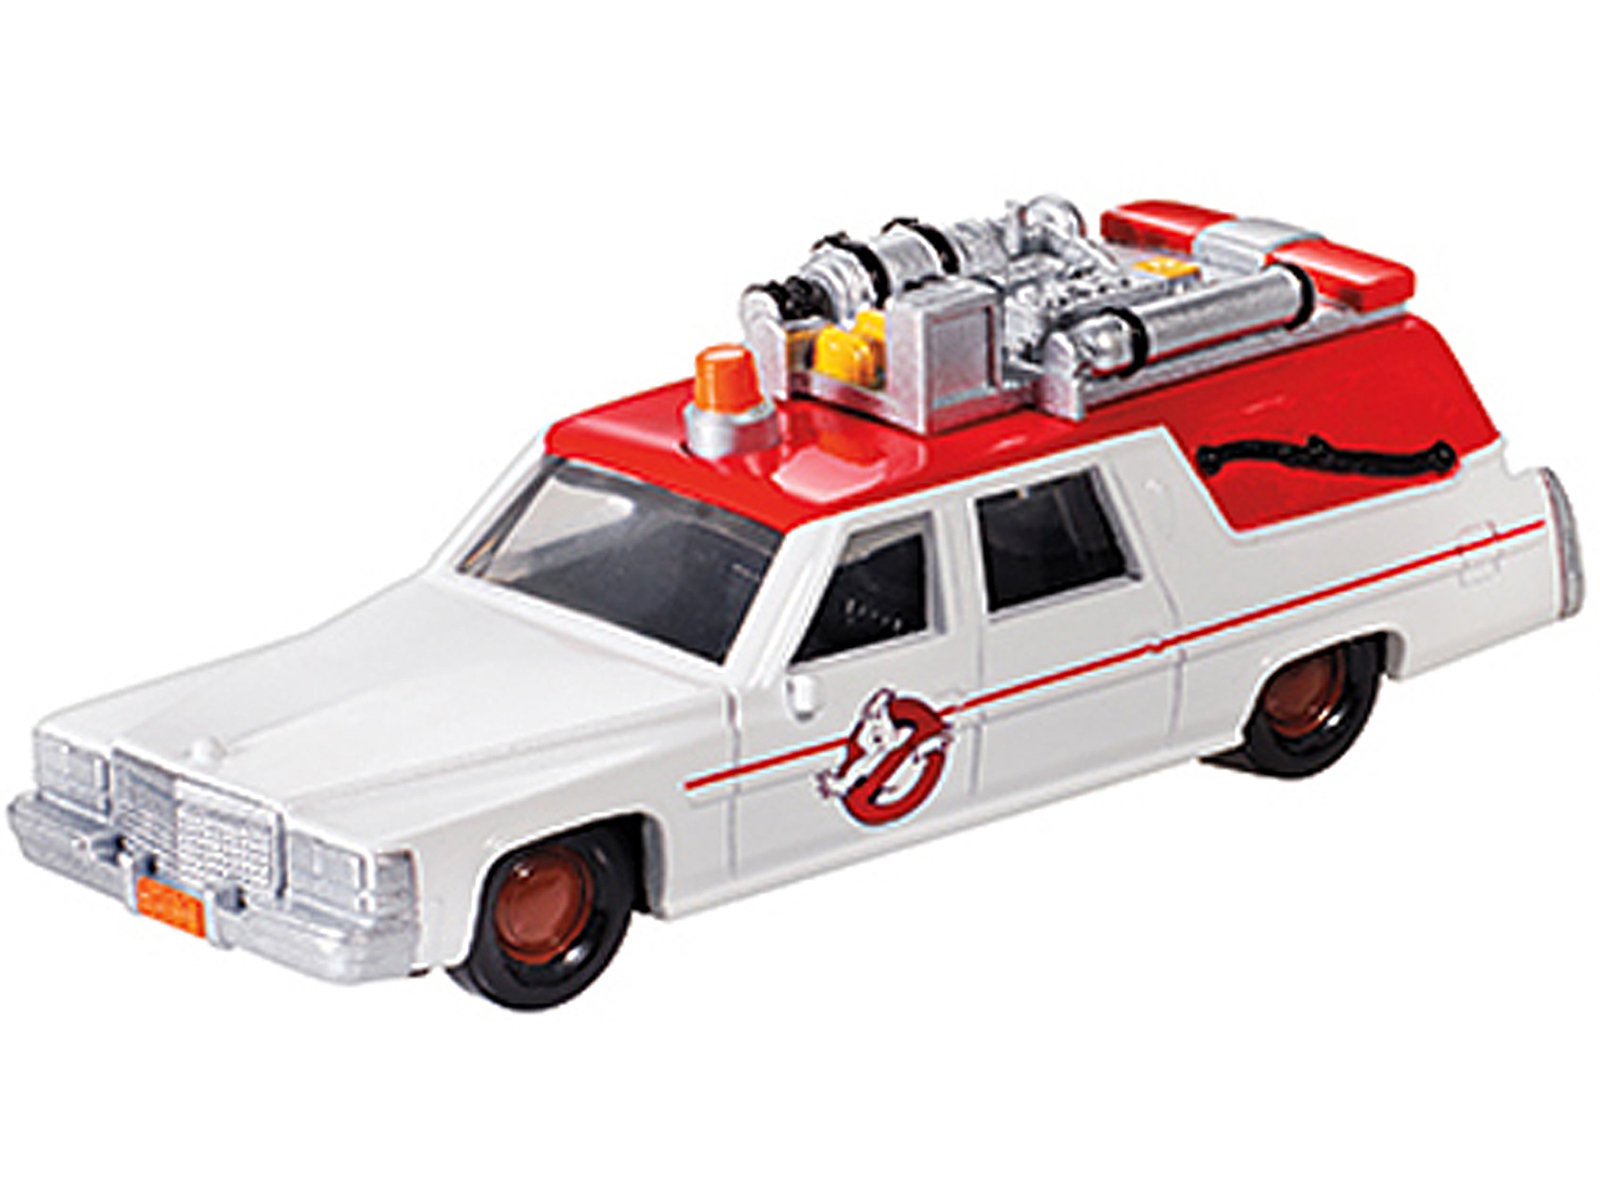 ECTO-1 1/64 Ambulance Car & ECTO-2 1/50 Bike "Ghostbusters" (2016) Movie Diecast Models by Hot Wheels - image 2 of 3